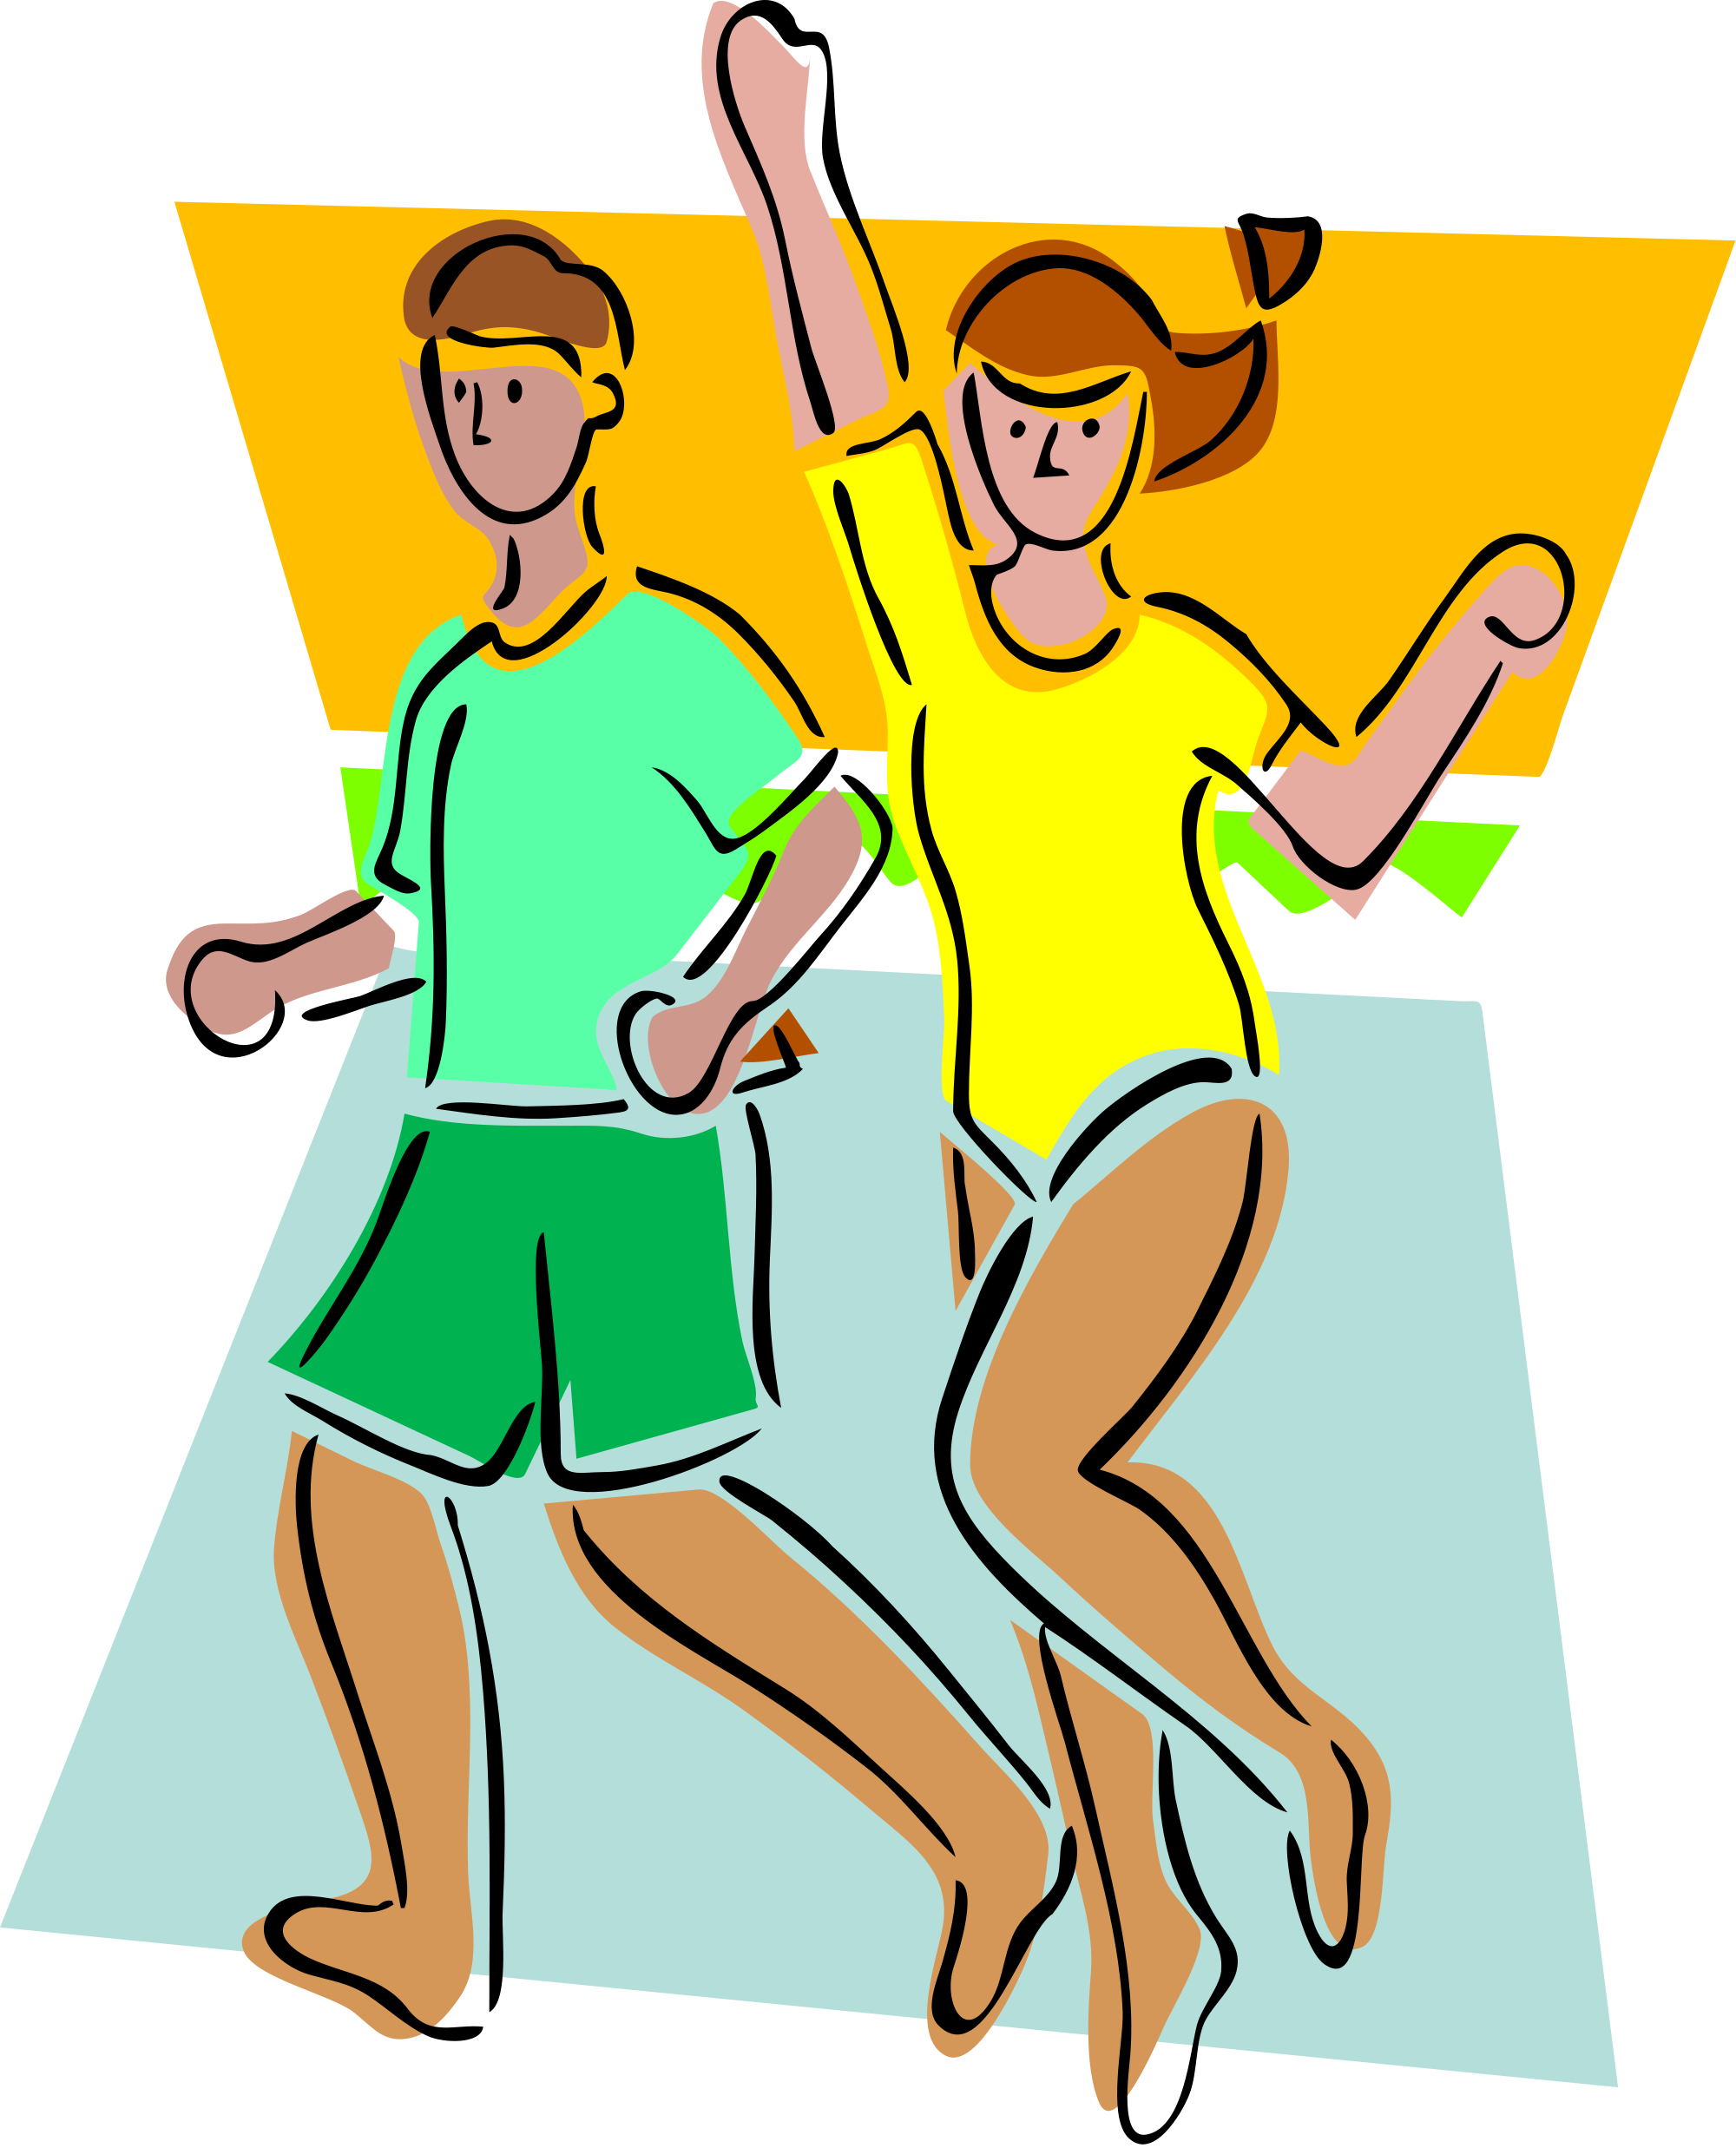 Gym class fileio donna. Exercise clipart group fitness